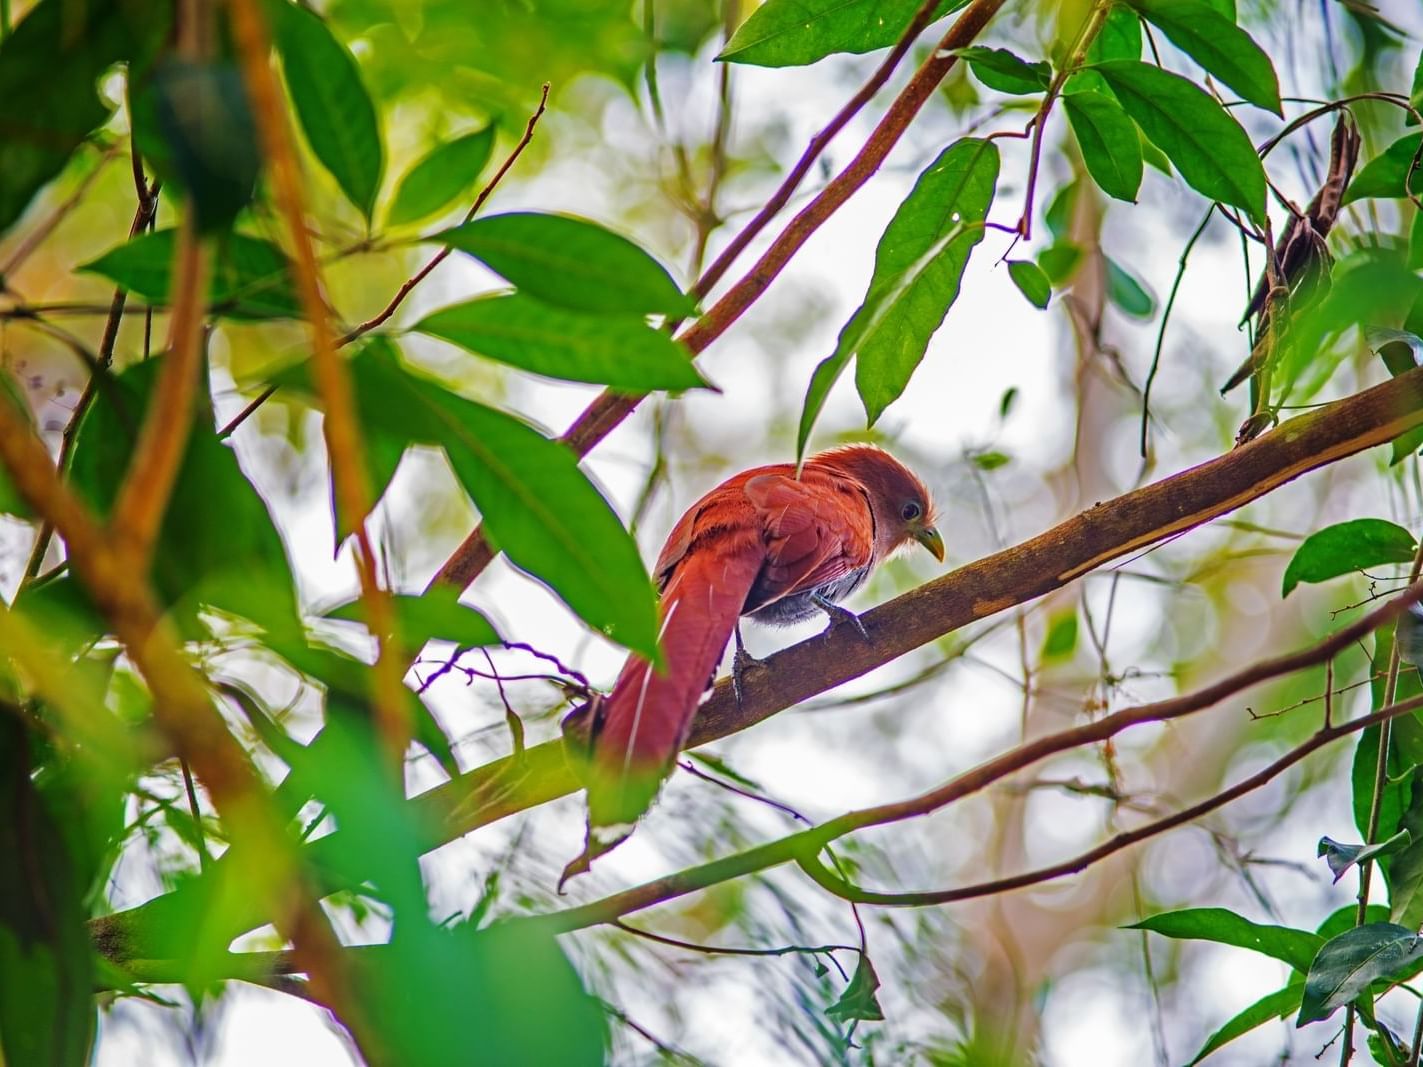 Bird on a branch in the Chetumal - Kohunlich city